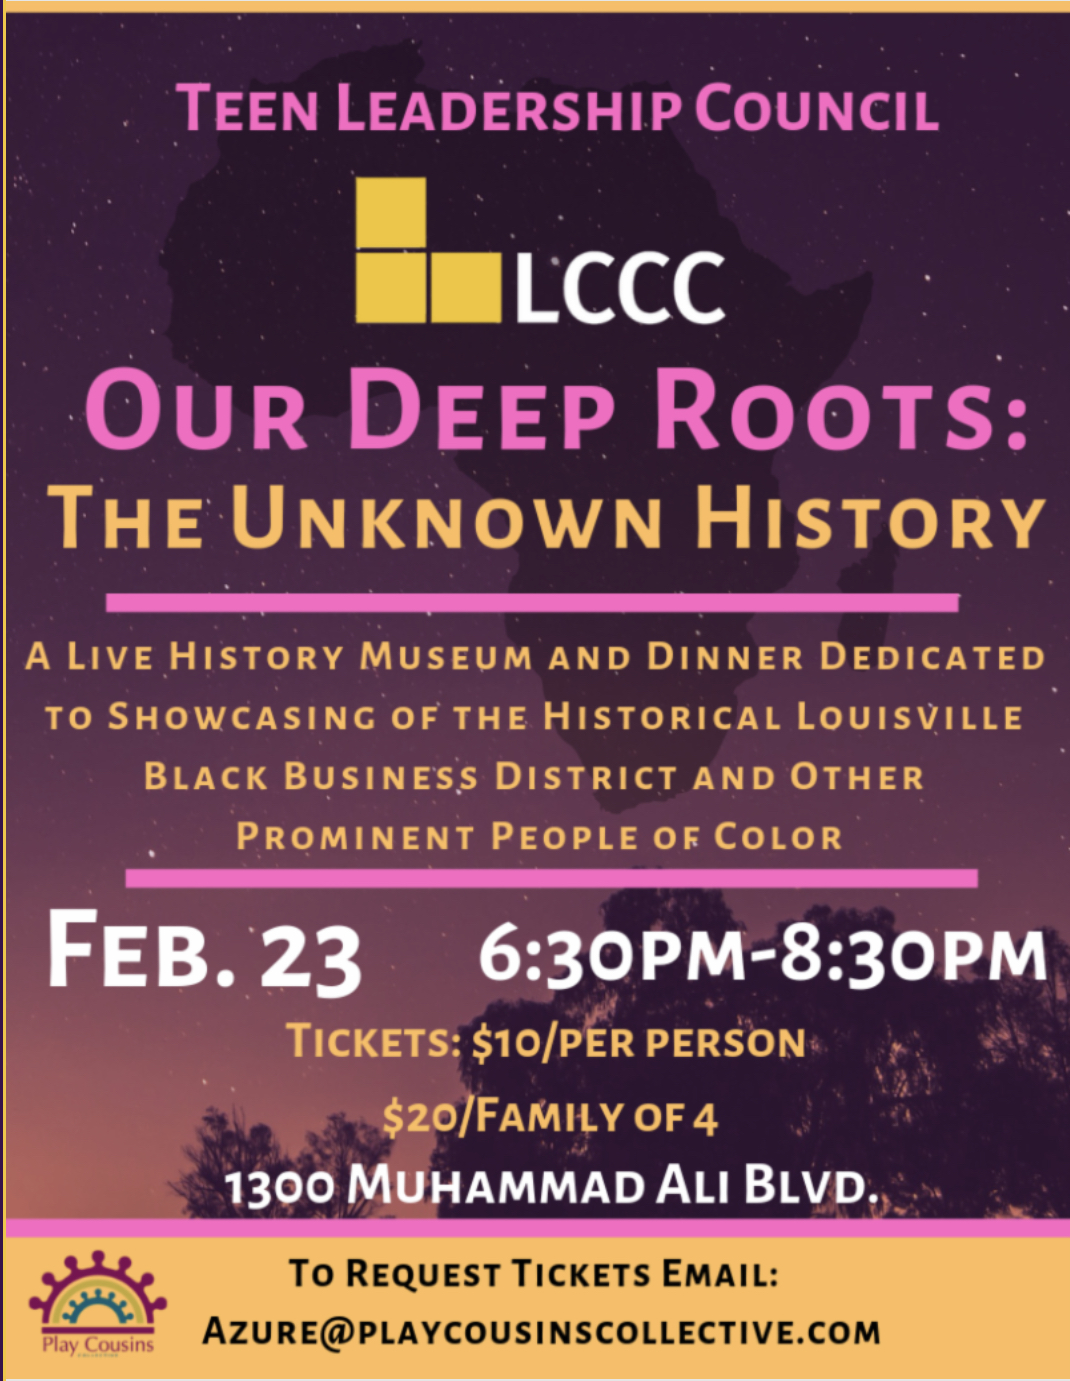 TLC Presents: Our Deep Roots: The Unknown History